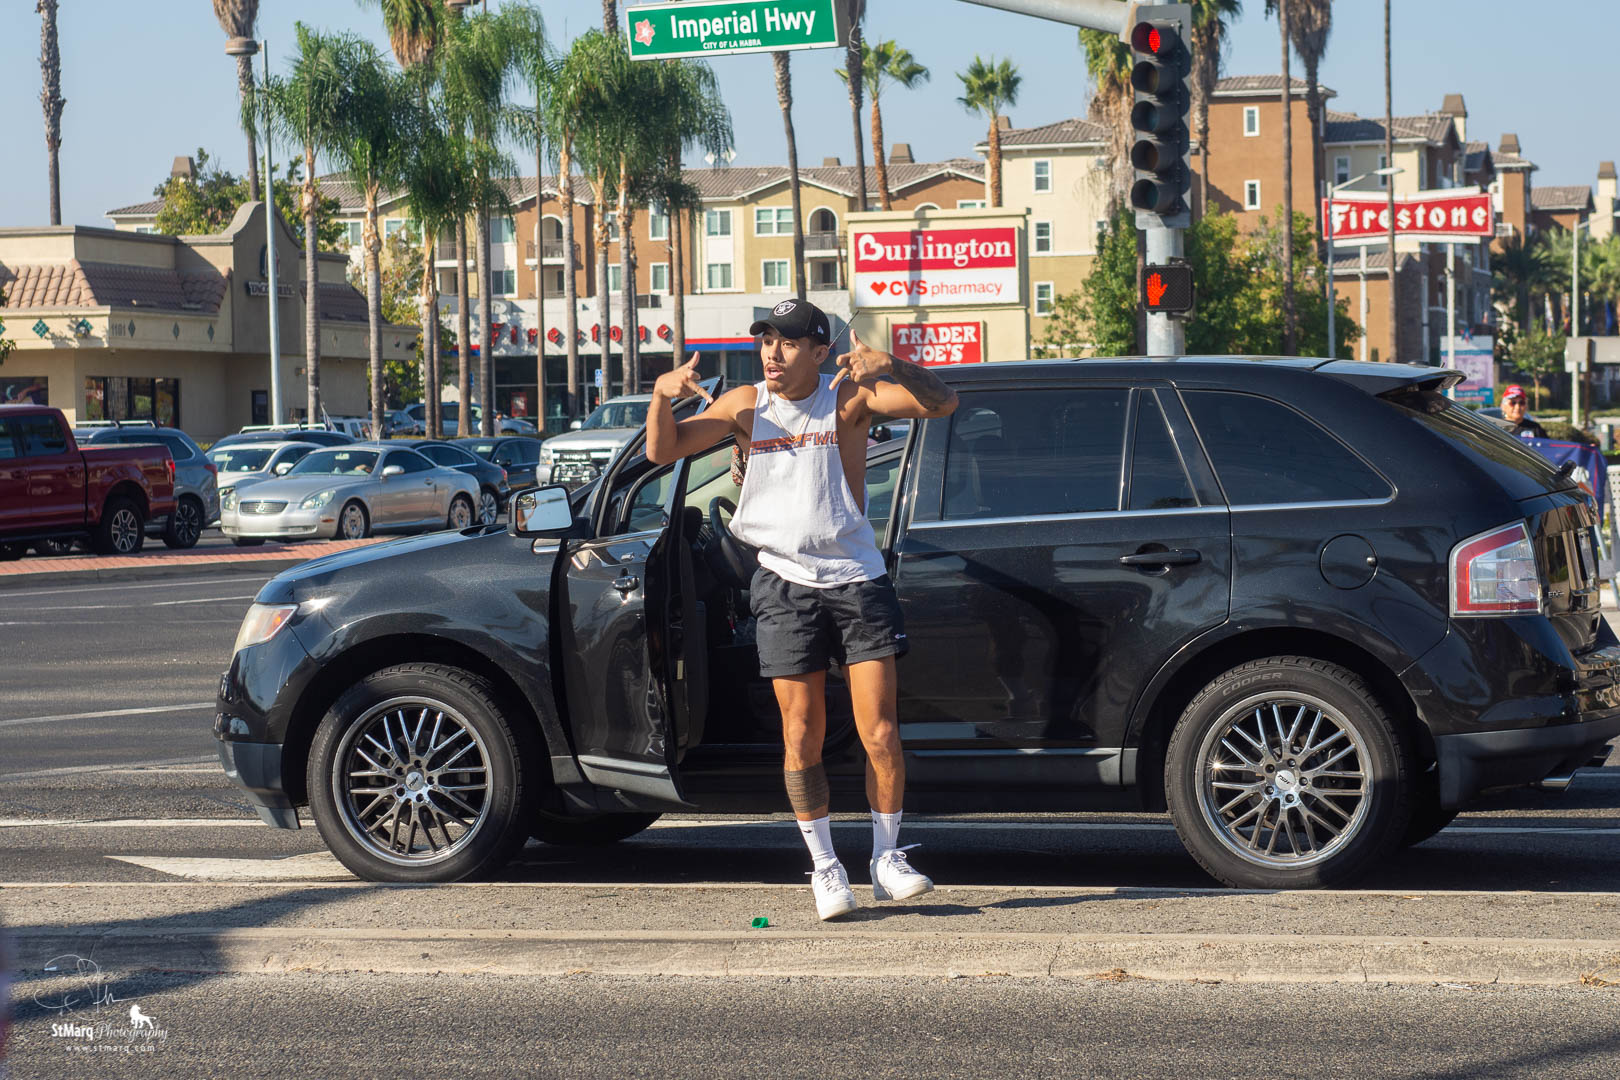 A counter Trump Rally protester danced outside his car with obscene hand gestures as he was waiting to make a left turn from Imperial Highway in front of Trump supporters.